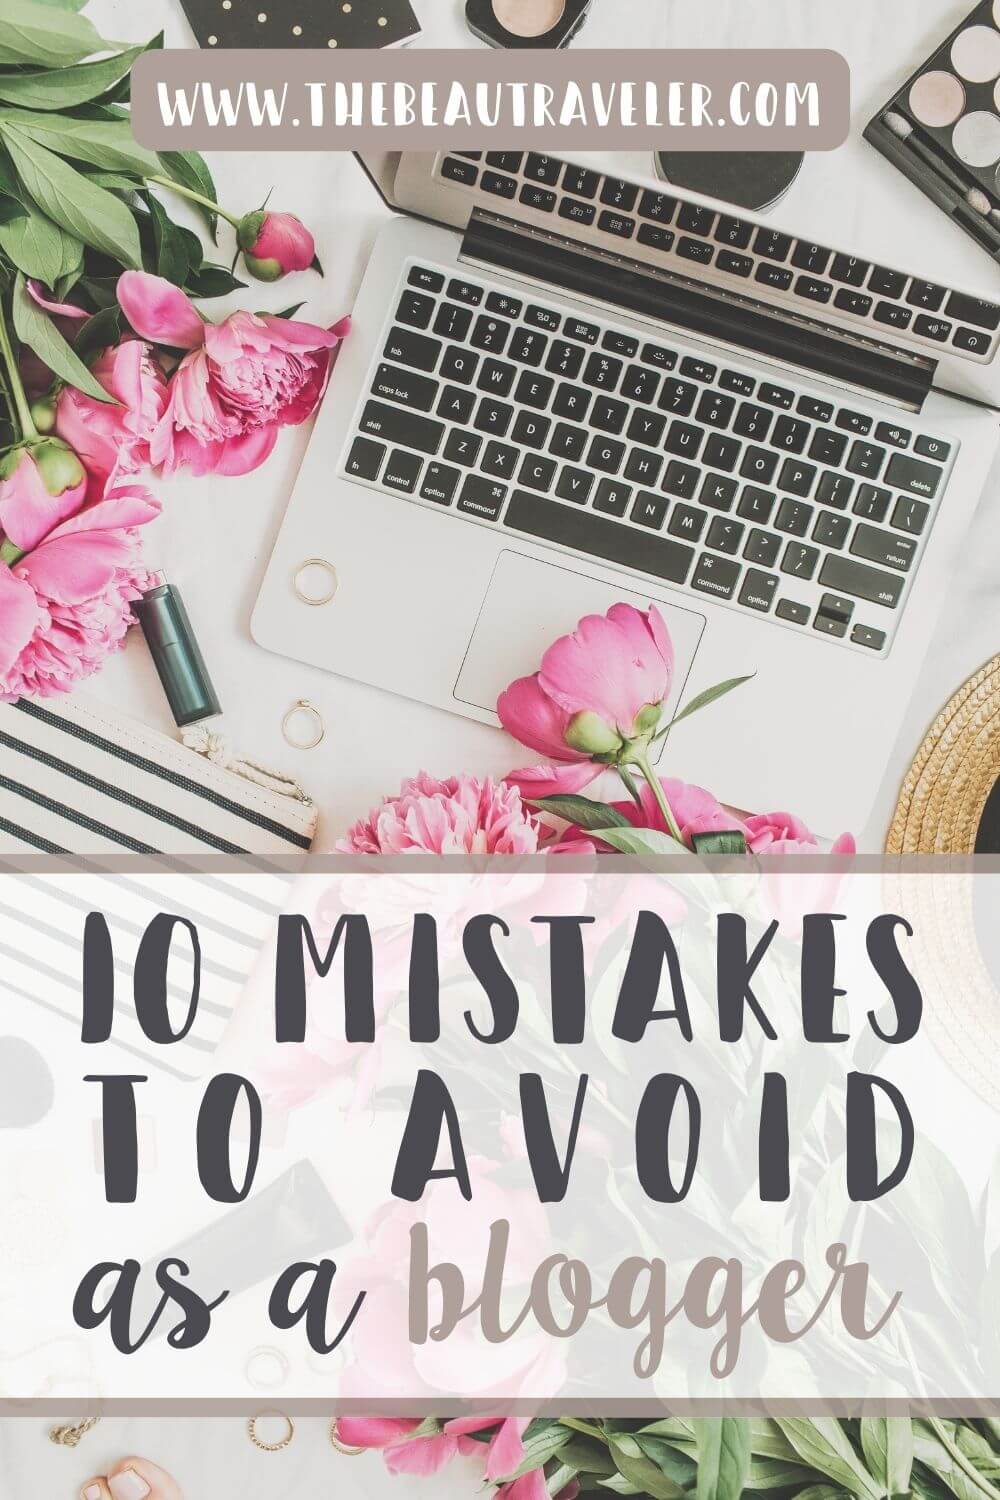 10 Early Blogging Mistakes You Should Avoid From Day One - The BeauTraveler